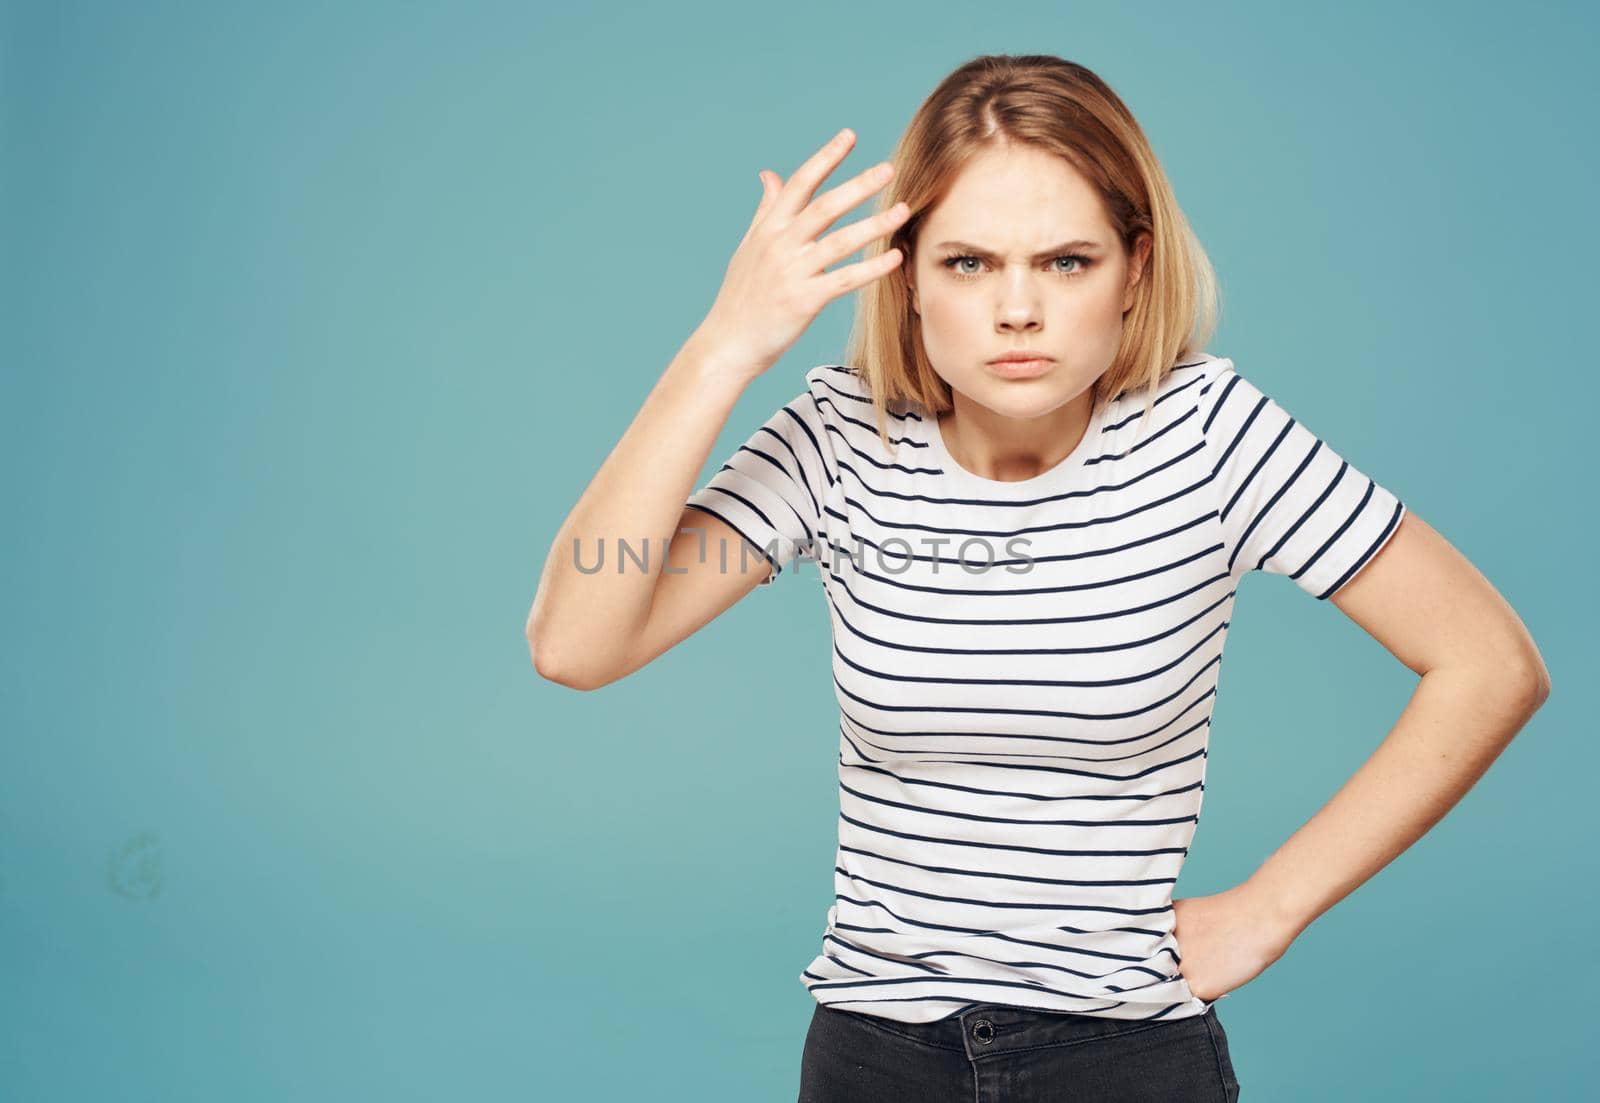 Nervous woman in a striped T-shirt gestures with her hands on a blue background by SHOTPRIME